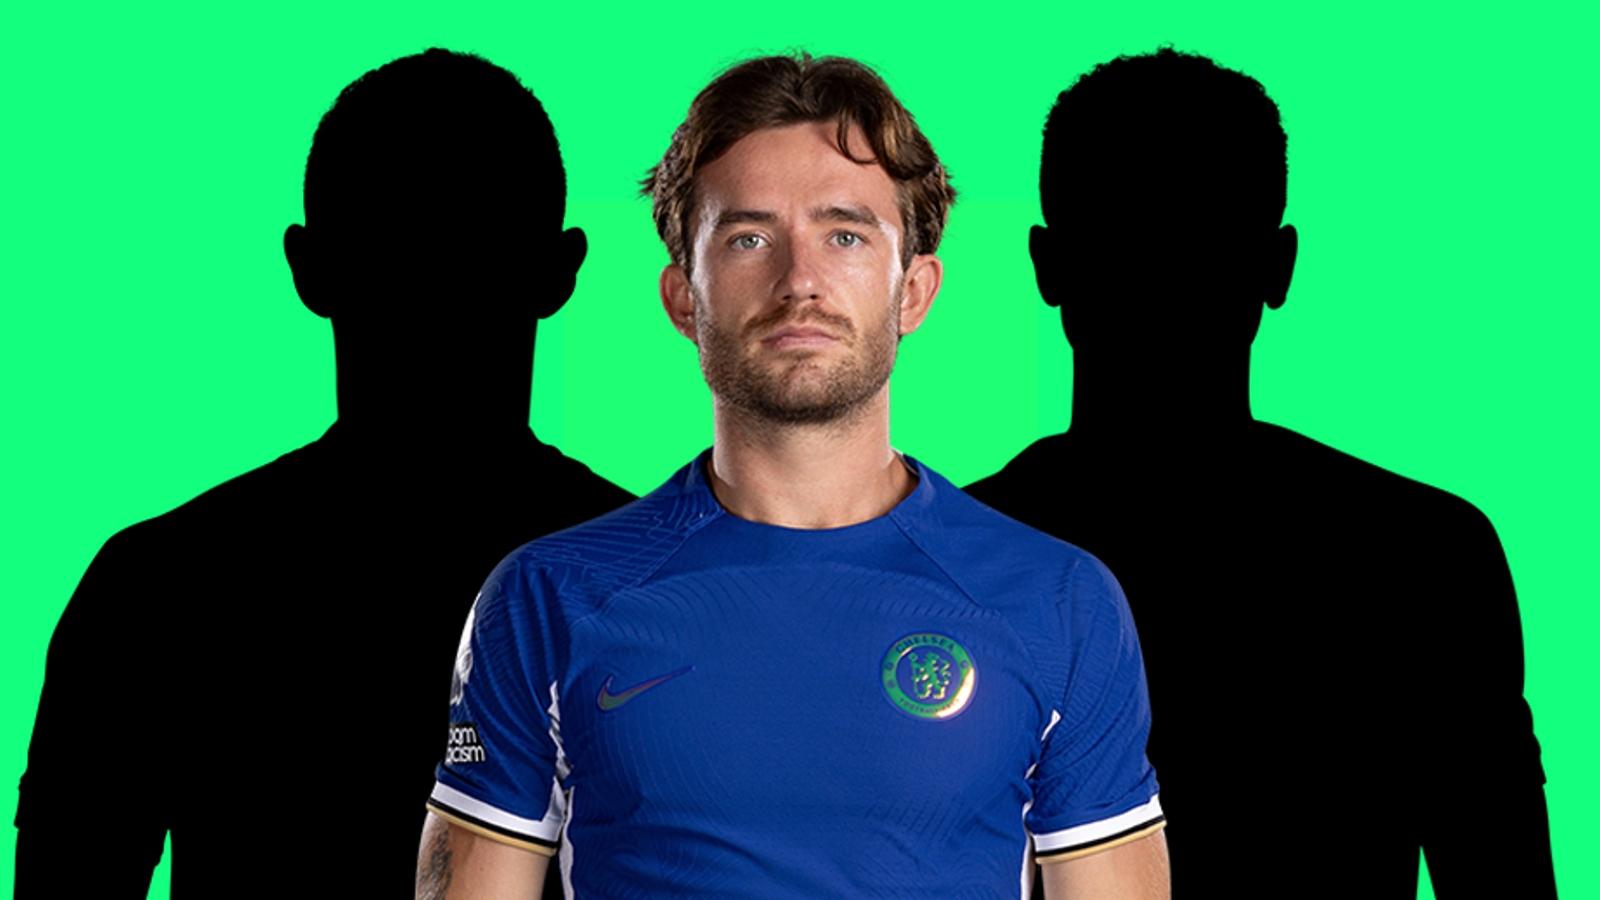 Ben Chilwell on green background with two player silhouettes behind him